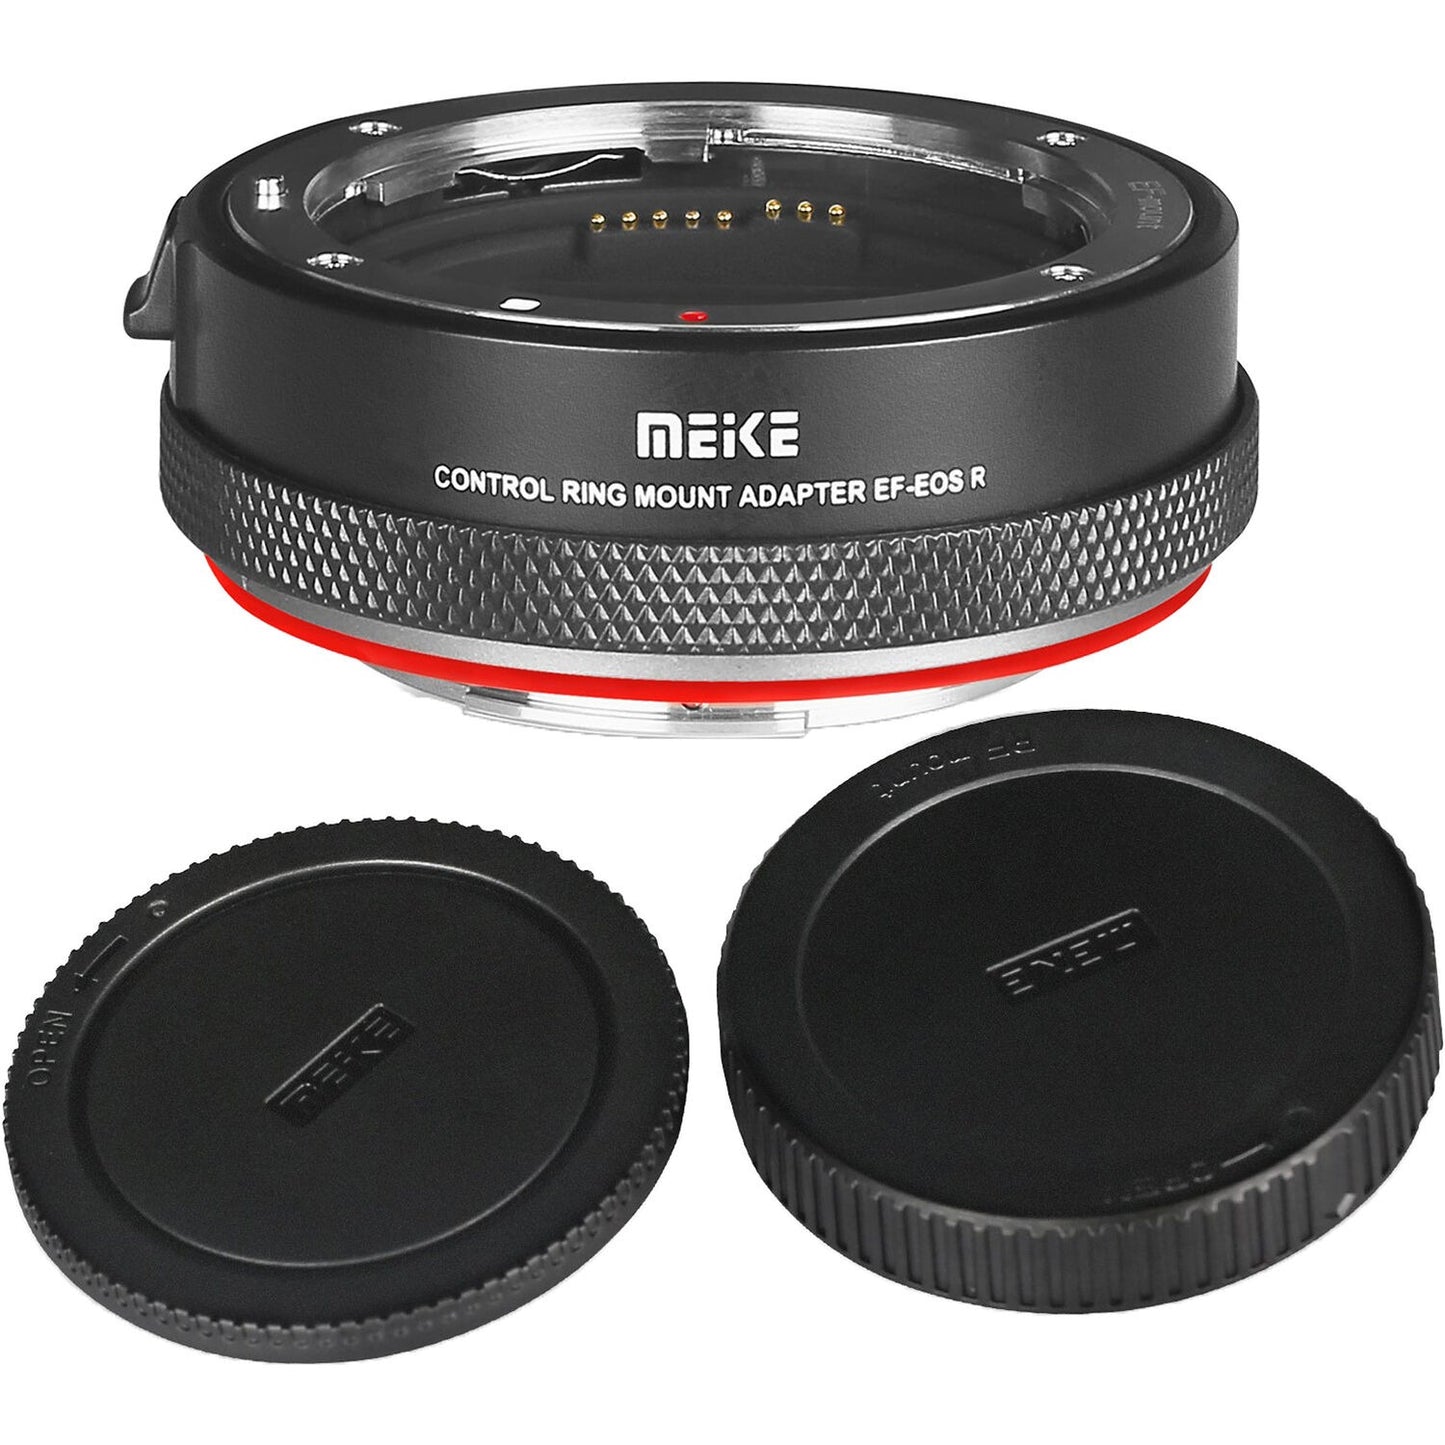 Meike MK-EFTR-B Auto Focus Control Ring Mount Adapter for Canon EF/EF-S Lens to EOS-R Cameras EOS R / RP / R5 / R6 / R7 / R10 / C70 Mirrorless Camera Setting Aperture, Shutter Speed, ISO